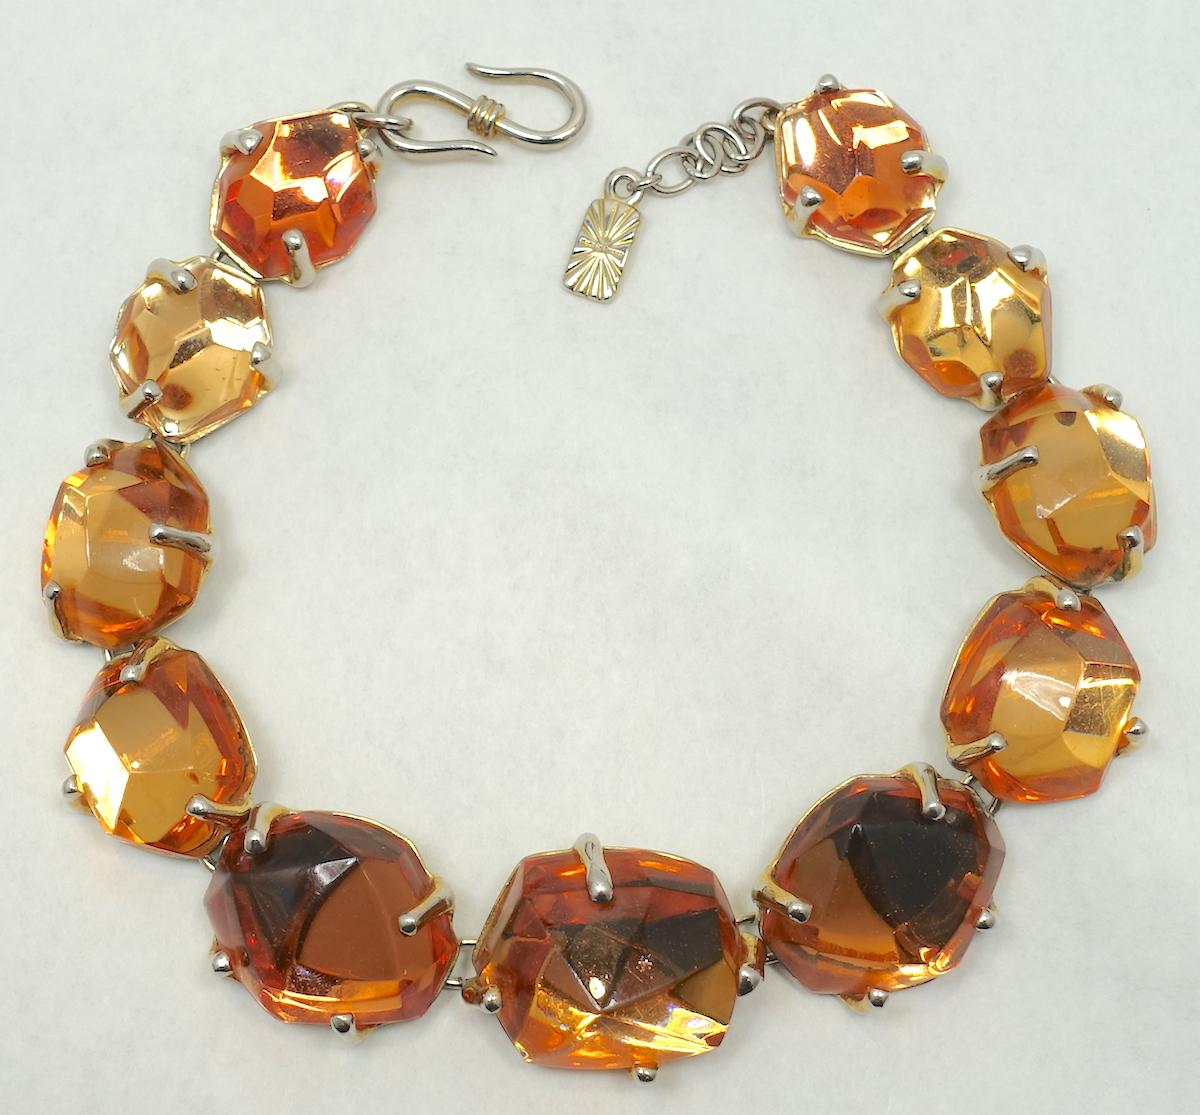 This dramatic vintage signed Yves St. Laurent necklace has large citrine prong set crystals in a silver tone setting.  In excellent condition, this necklace measures 16” with a hook closure x 1-1/8” and is signed “YSL Made in France”.